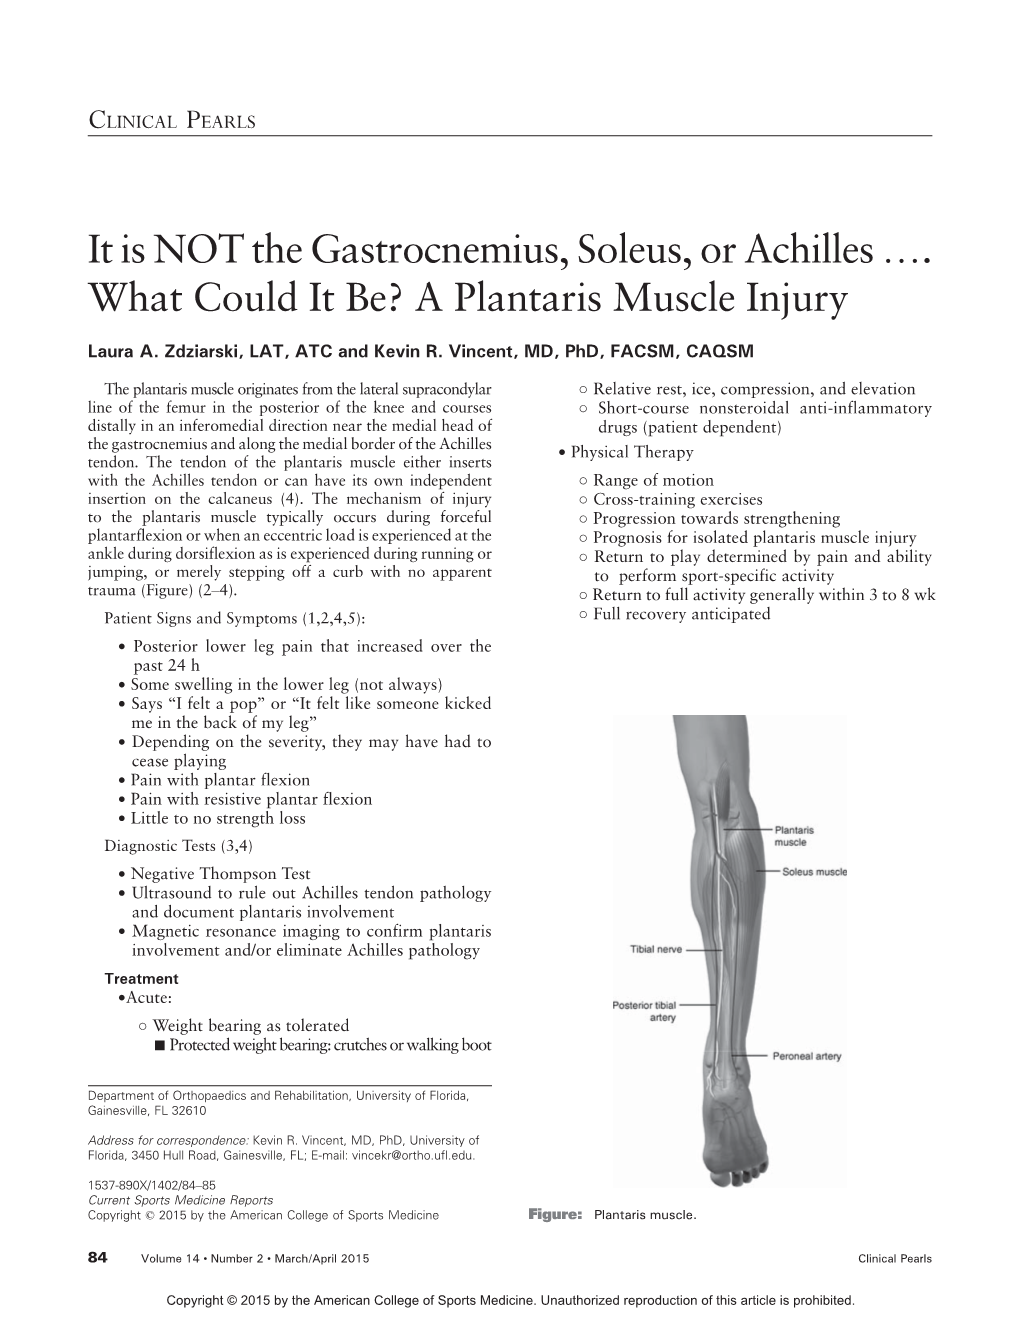 It Is NOT the Gastrocnemius, Soleus, Or Achillesi. What Could It Be? a Plantaris Muscle Injury